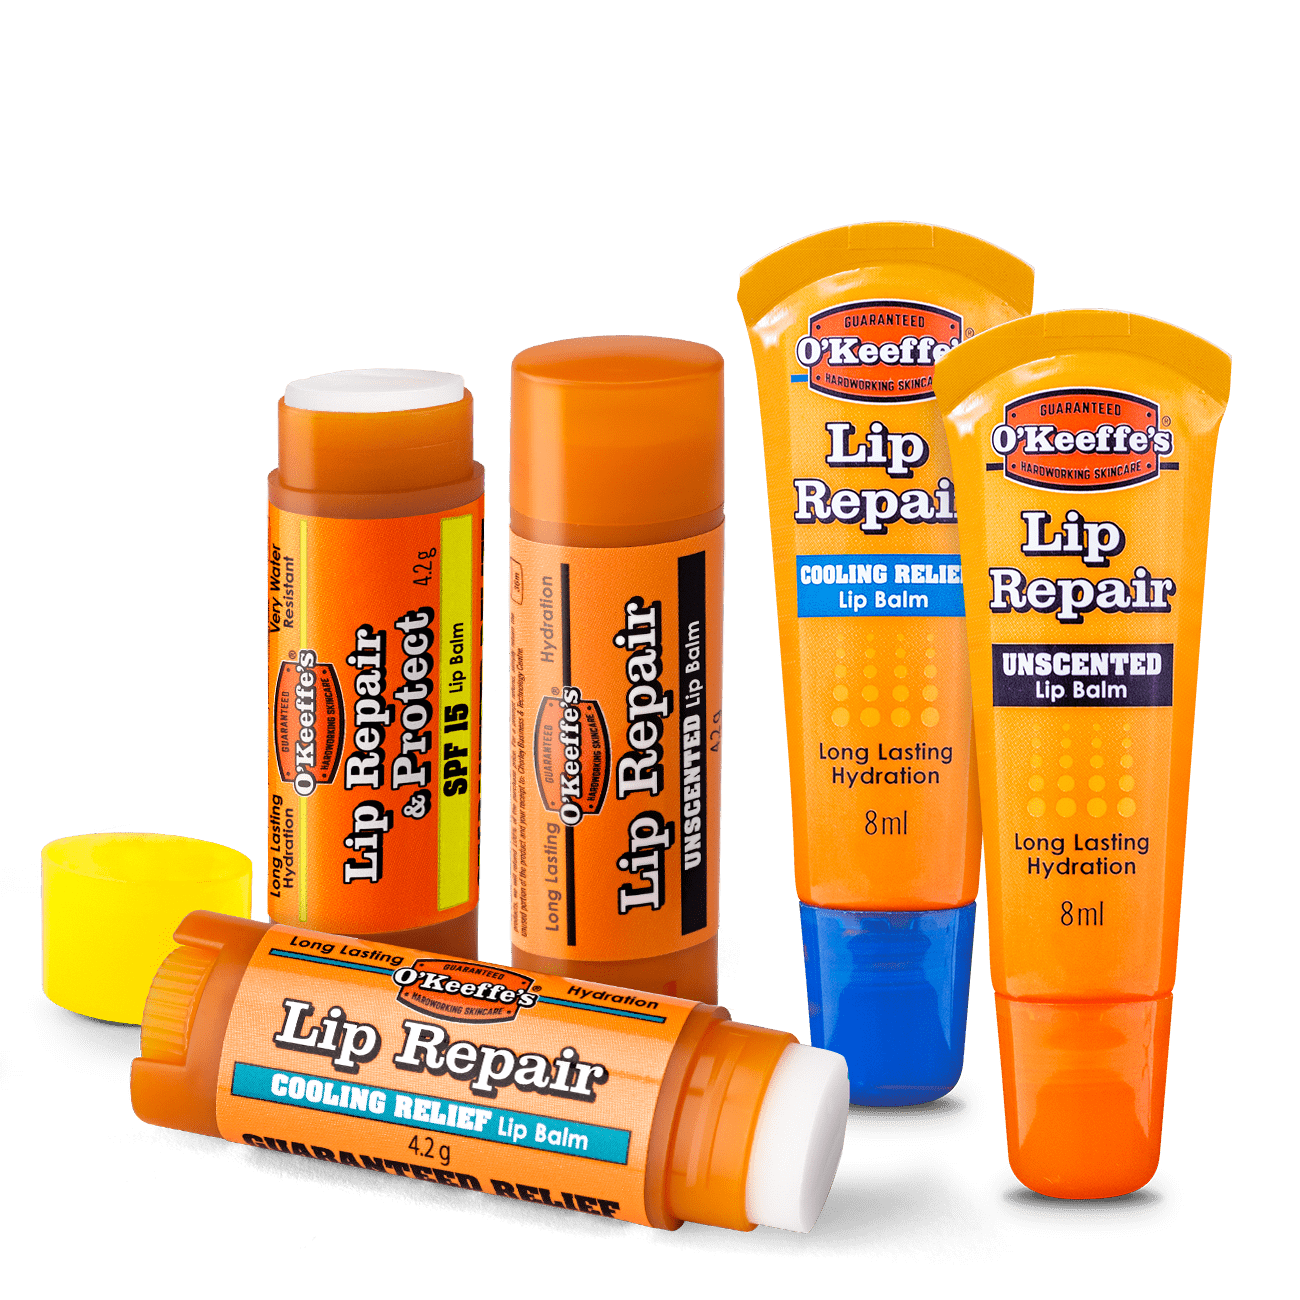 O'Keeffe's Lip Repair products